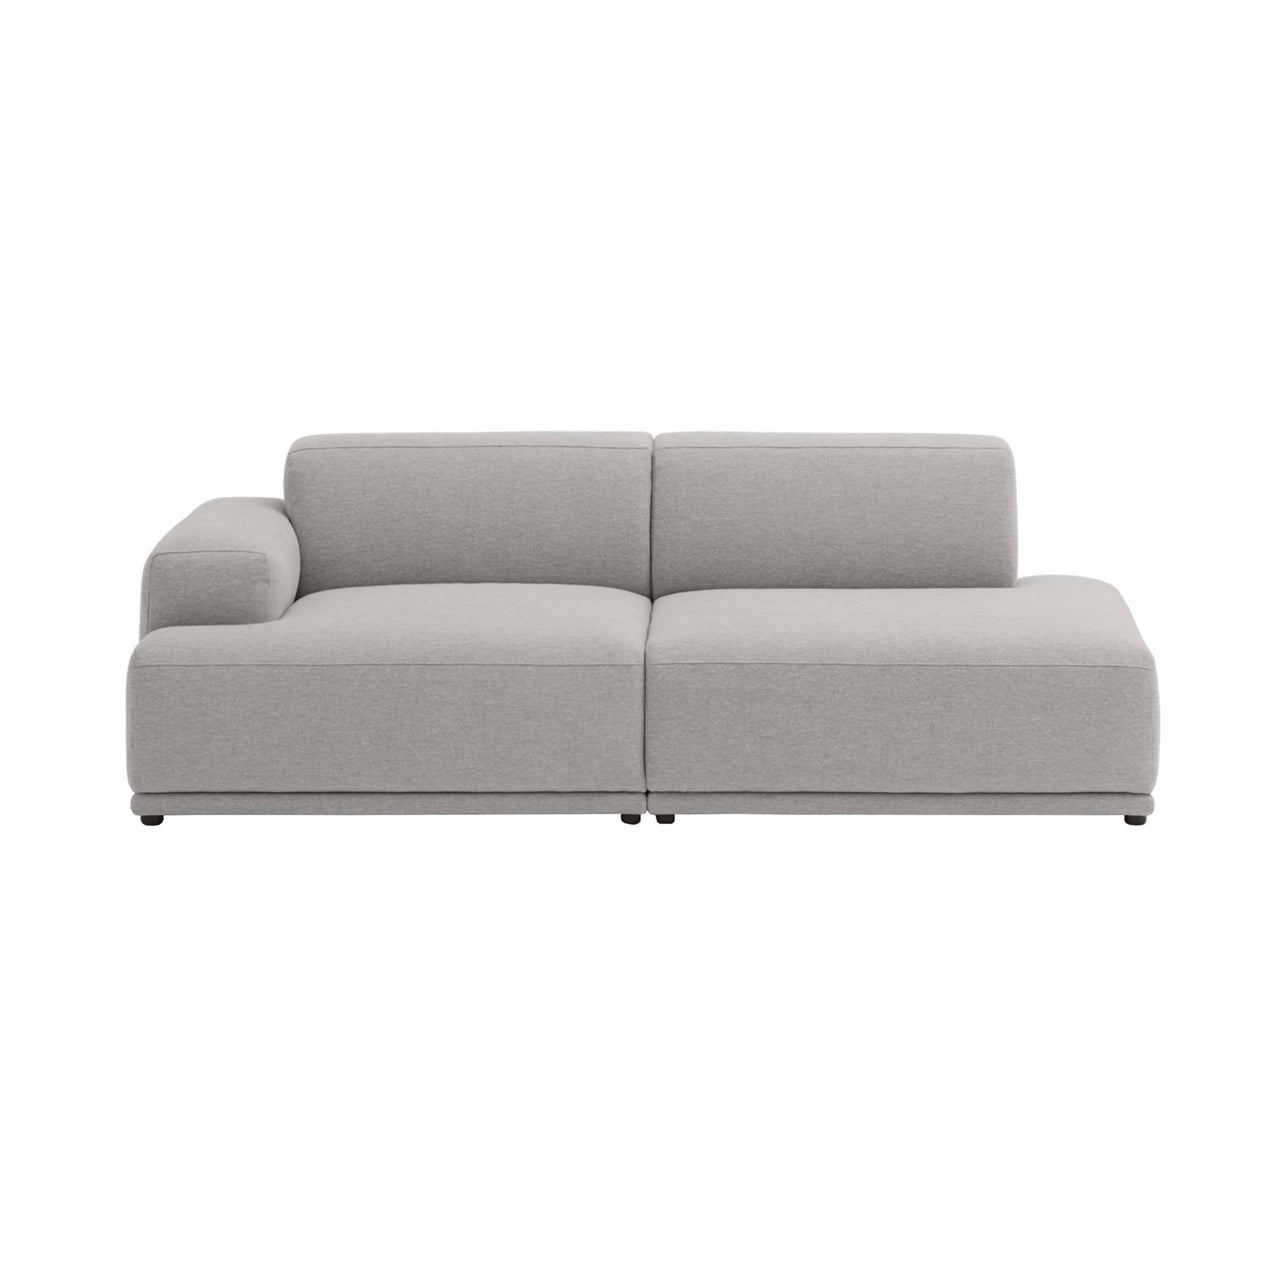 Connect Soft Modular Sofa: 2 Seater + Configuration 2 + Clay 12